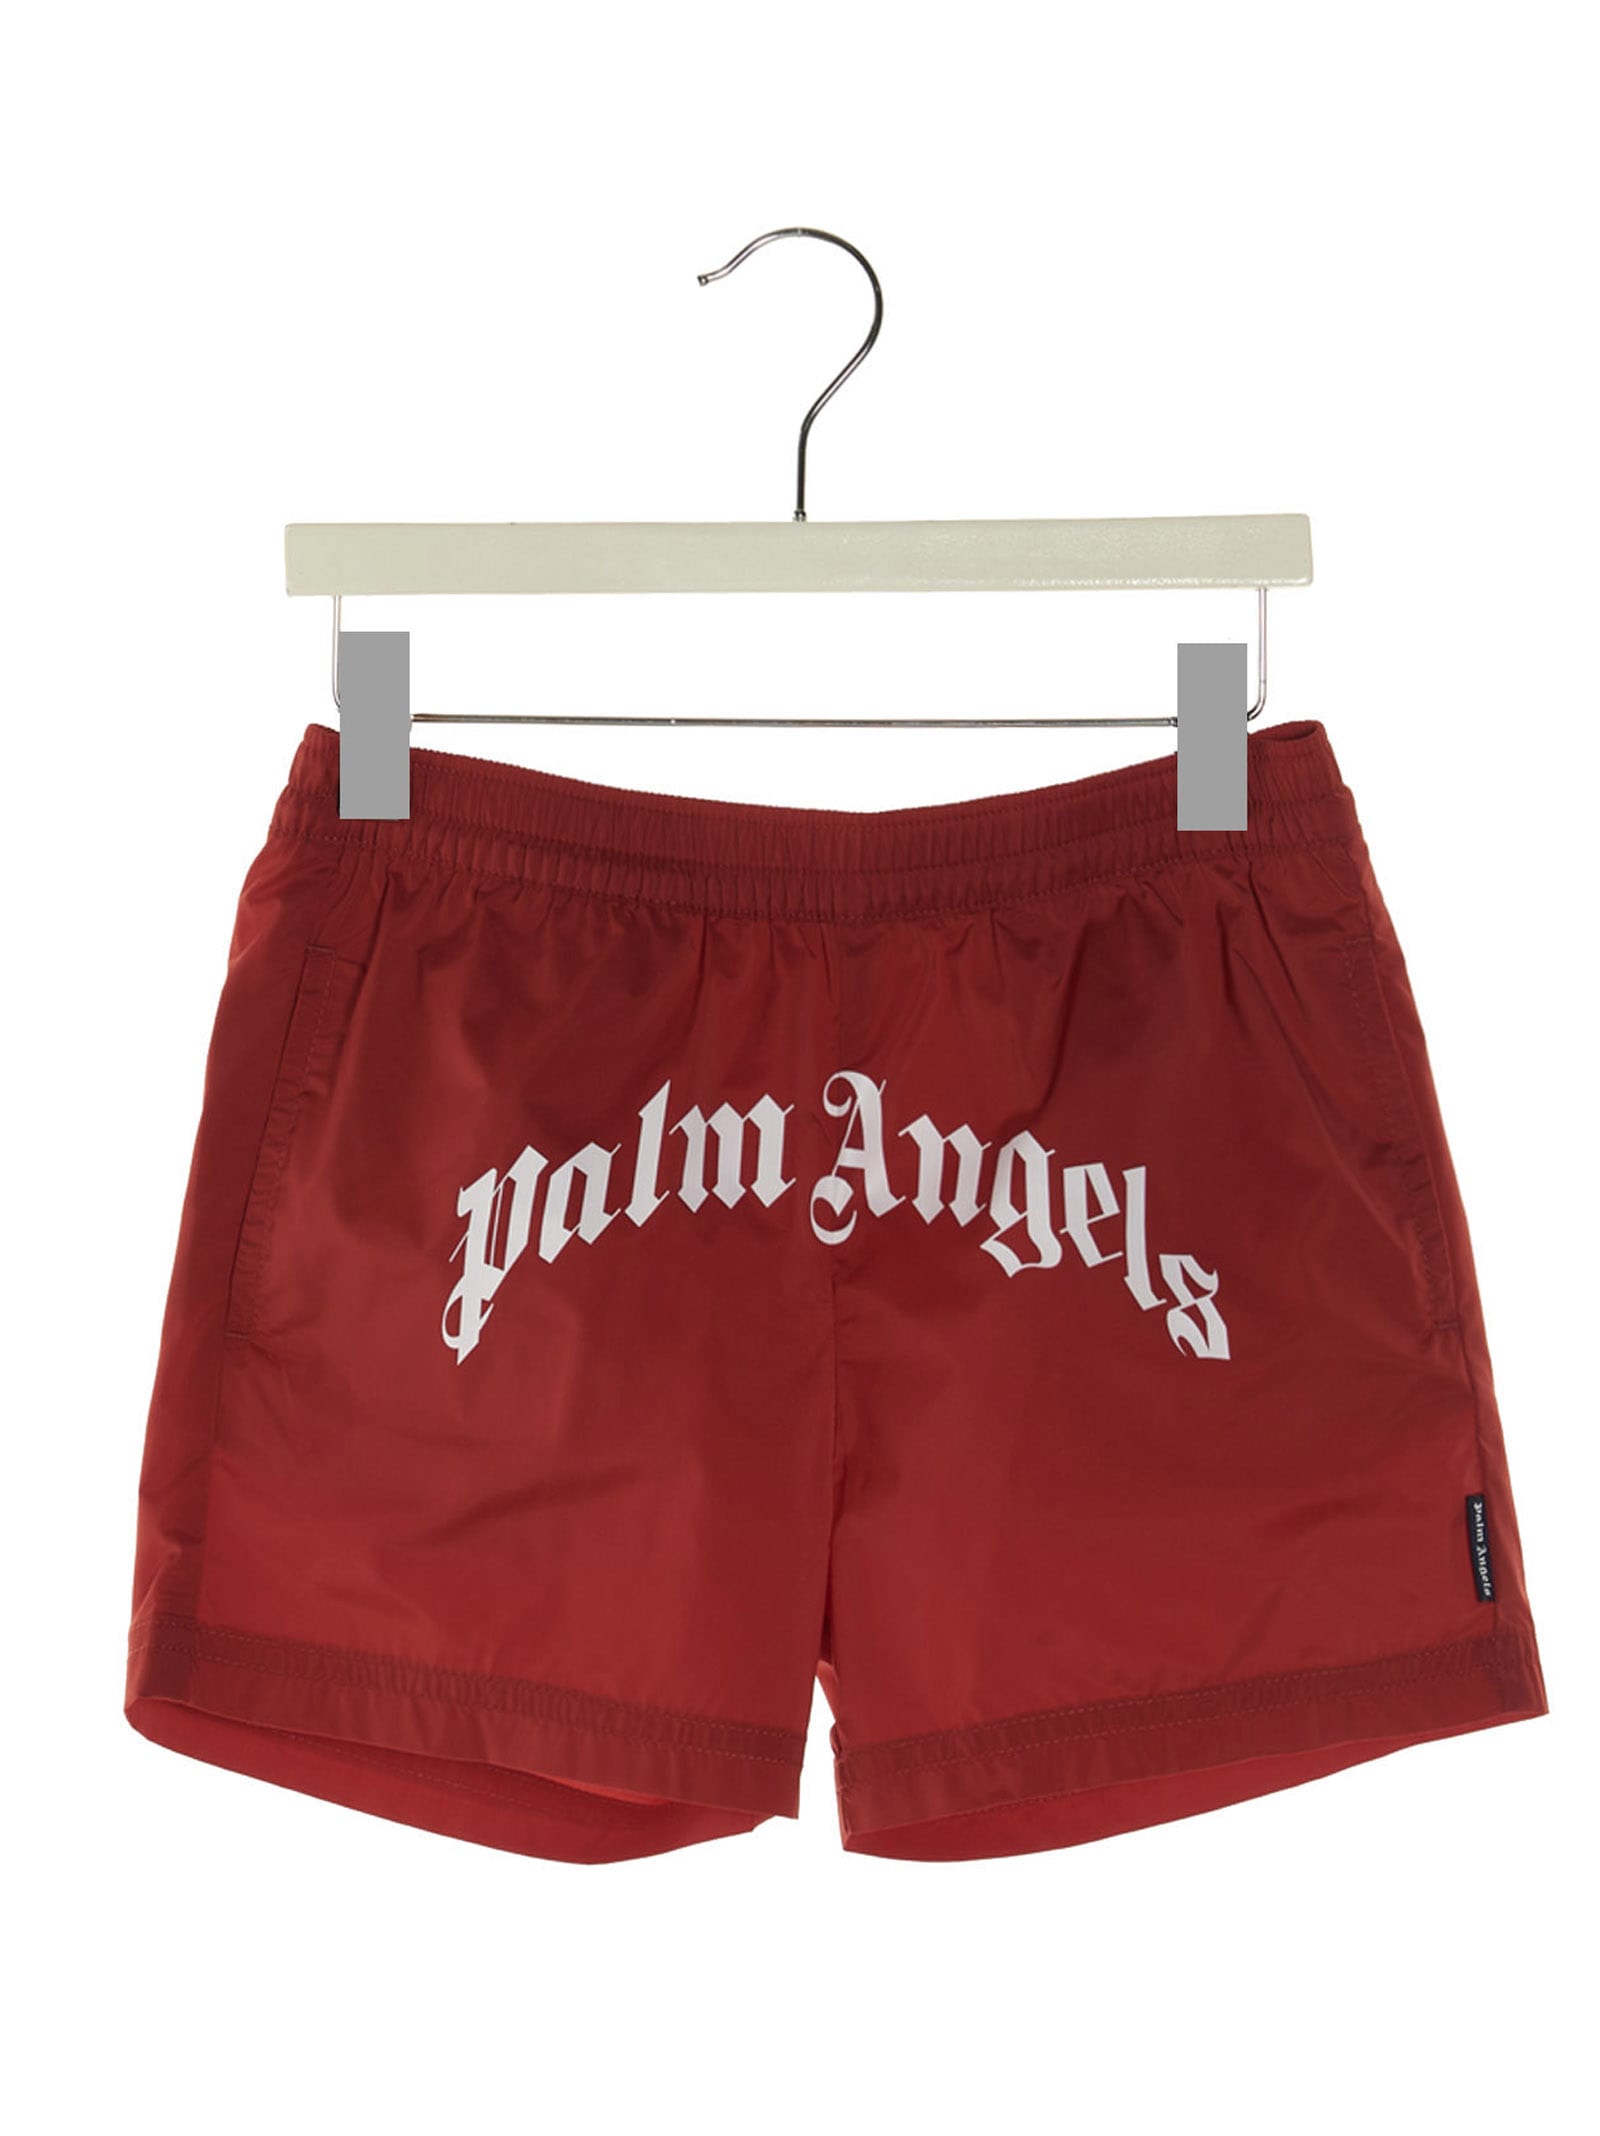 Palm Angels curved Logo Swimming Trunks